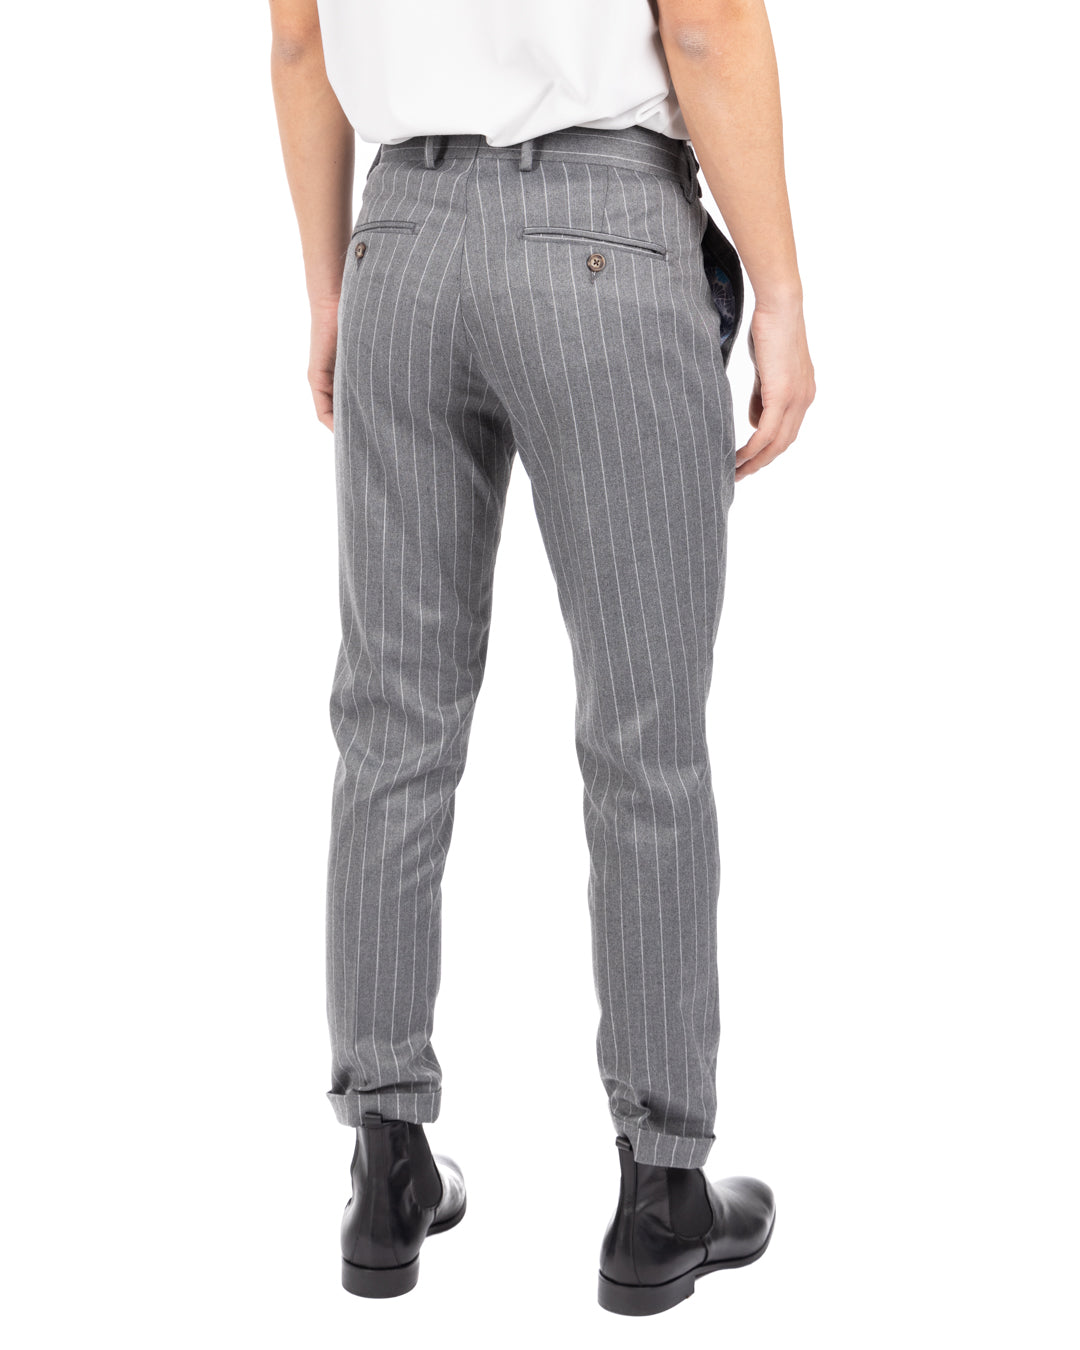 Italian - gray pinstriped high-waisted trousers